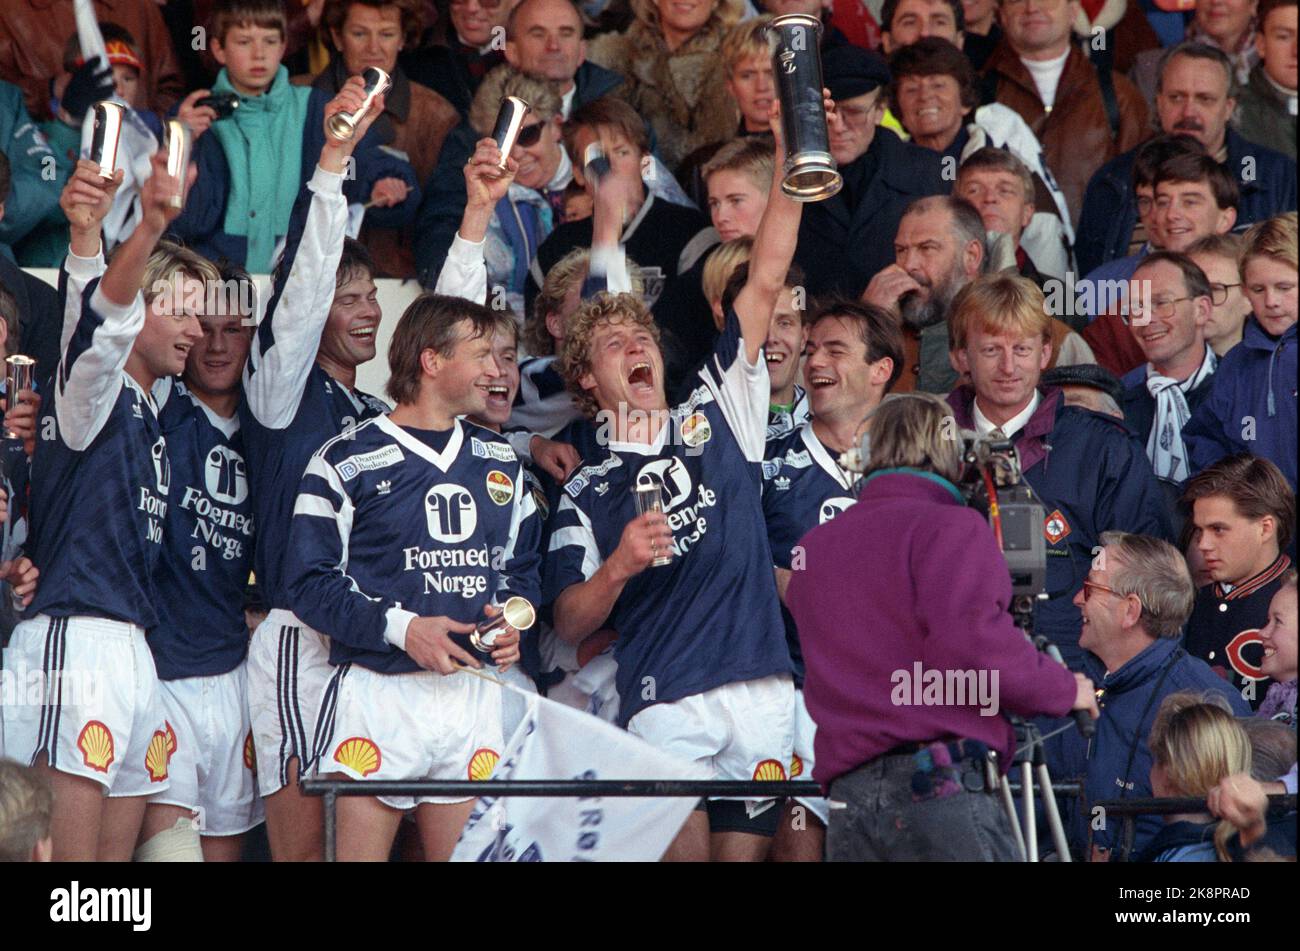 Oslo 19911020: Cup final 1991. Rosenborg (RBK) - Strømsgodset (SIF) (2-3). Ullevaal Stadium. Picture: Strømsgodset players receive trophies and rejoice over the cup victory. The centerpiece and the one who cheered the highest was probably the Strømsgodset hero, two-goal scorer Odd Johnsen (middle, with the King's Cup). Photo: Morten Holm / NTB / NTB Stock Photo